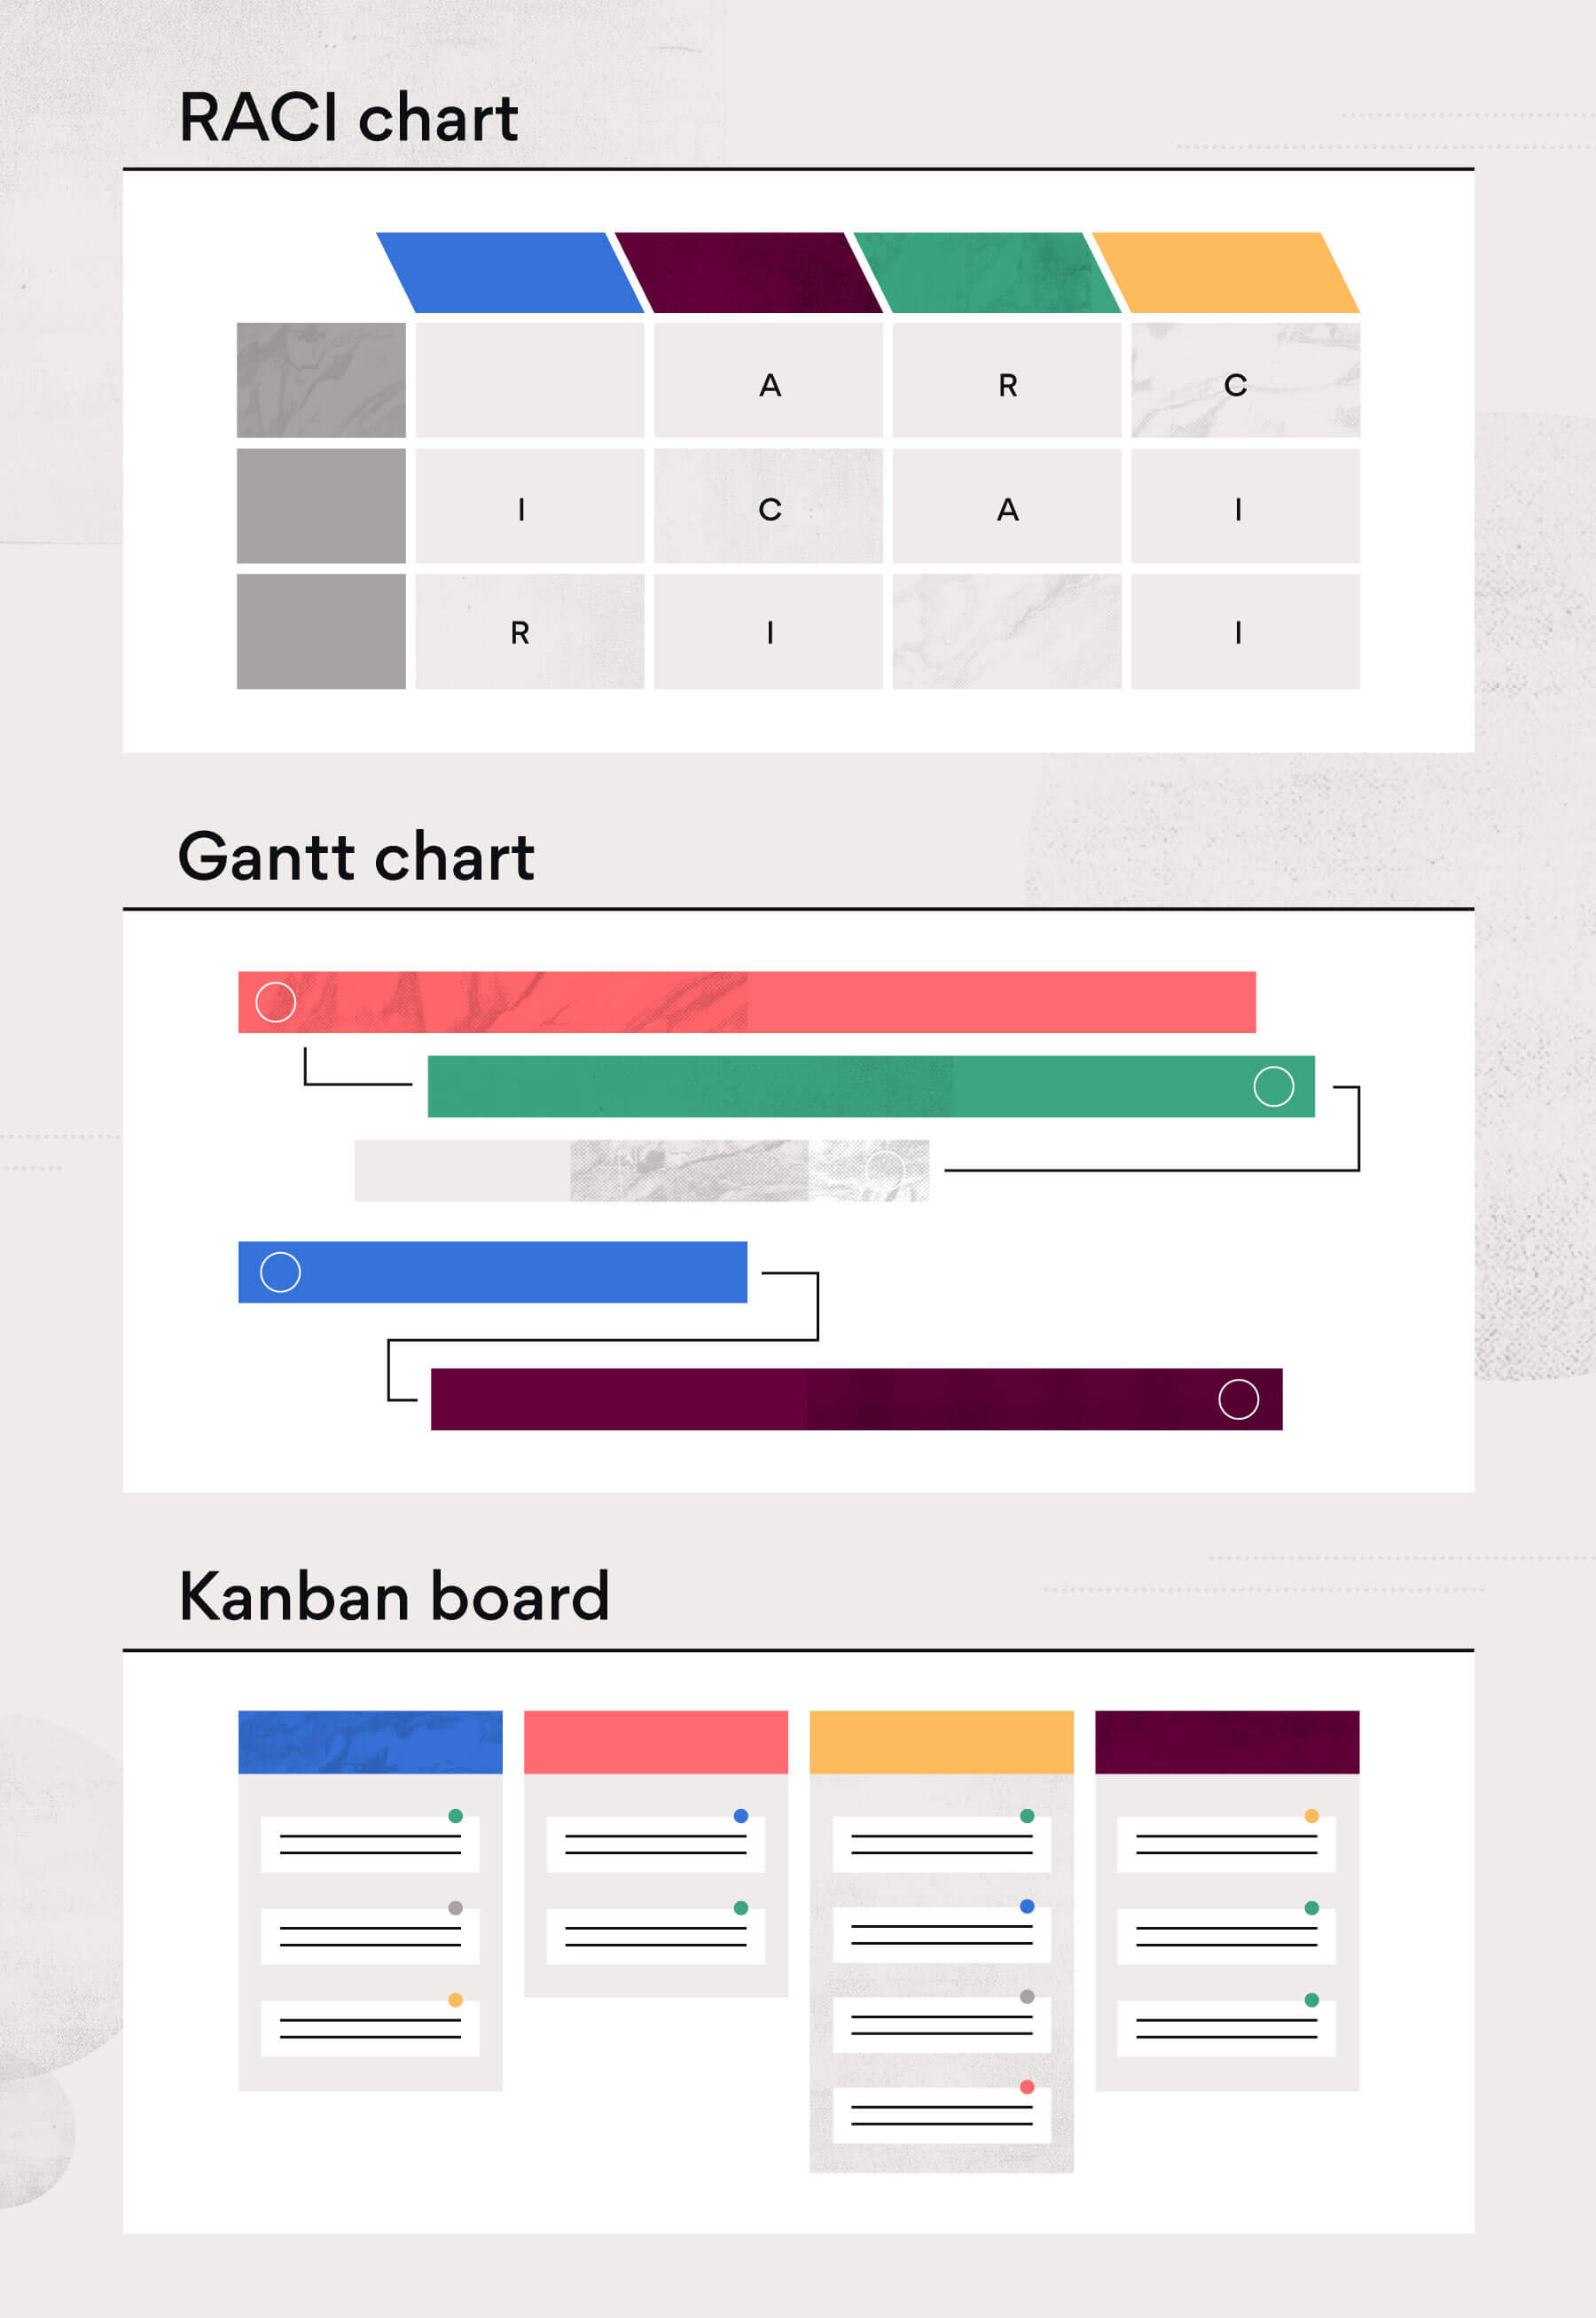 [inline illustration] Types of IT project management tools (infographic)